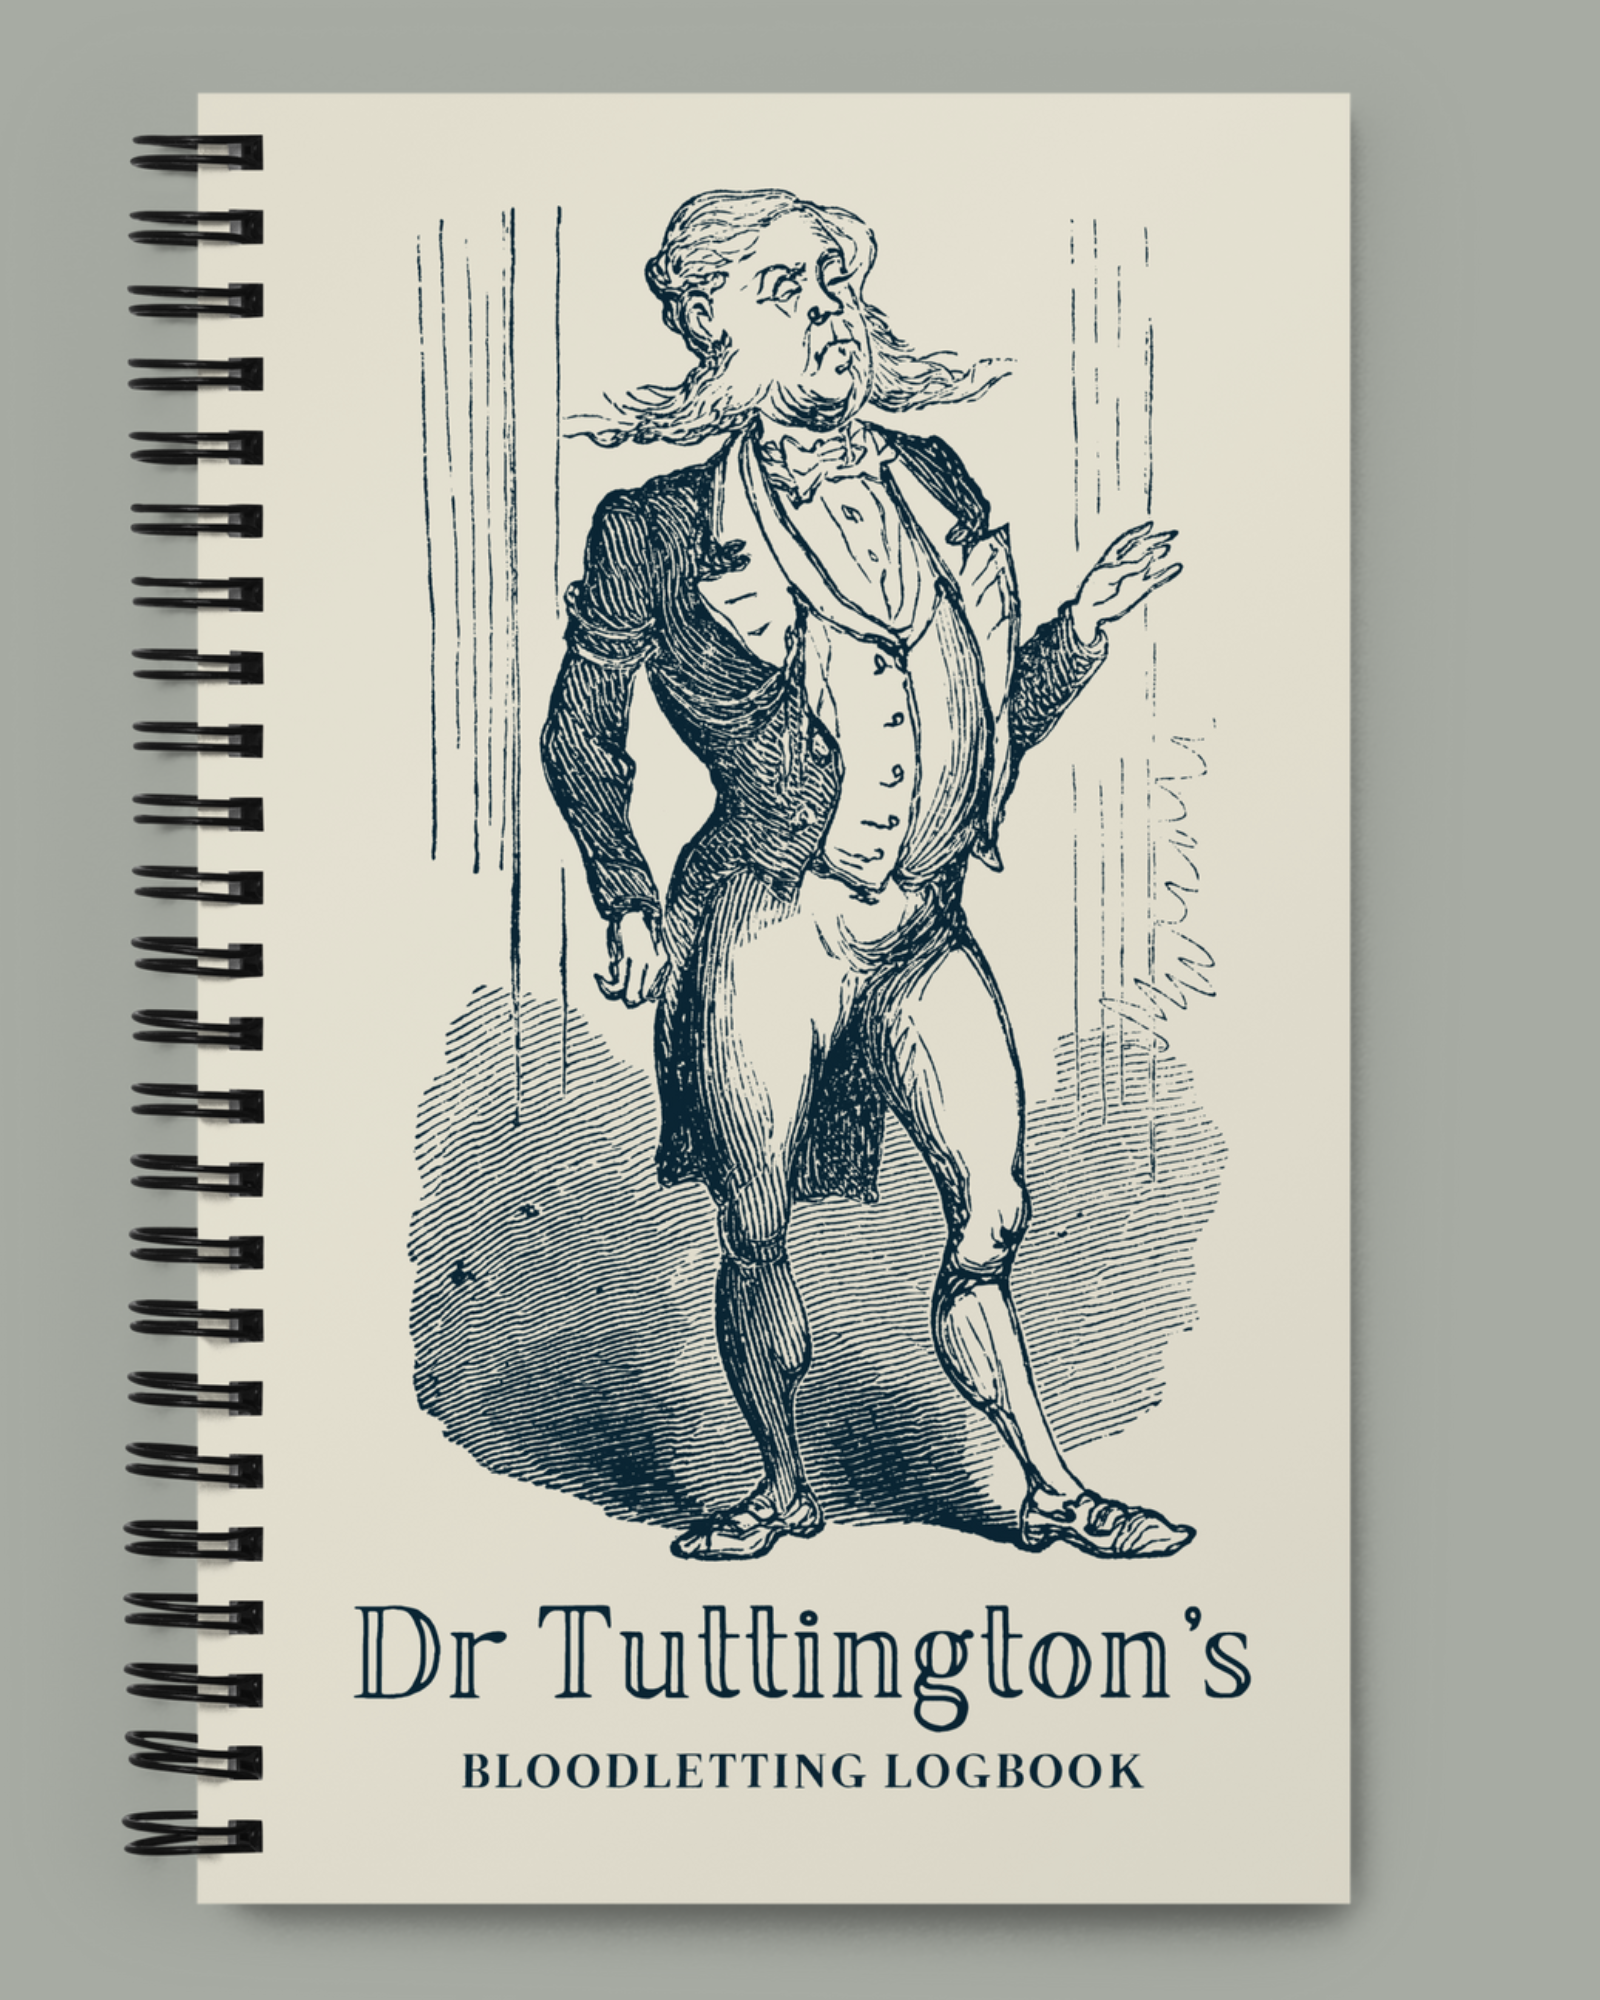 Fun Duly Noted Notebooks including Dr Tuttington's medical journals by Jolly & Goode